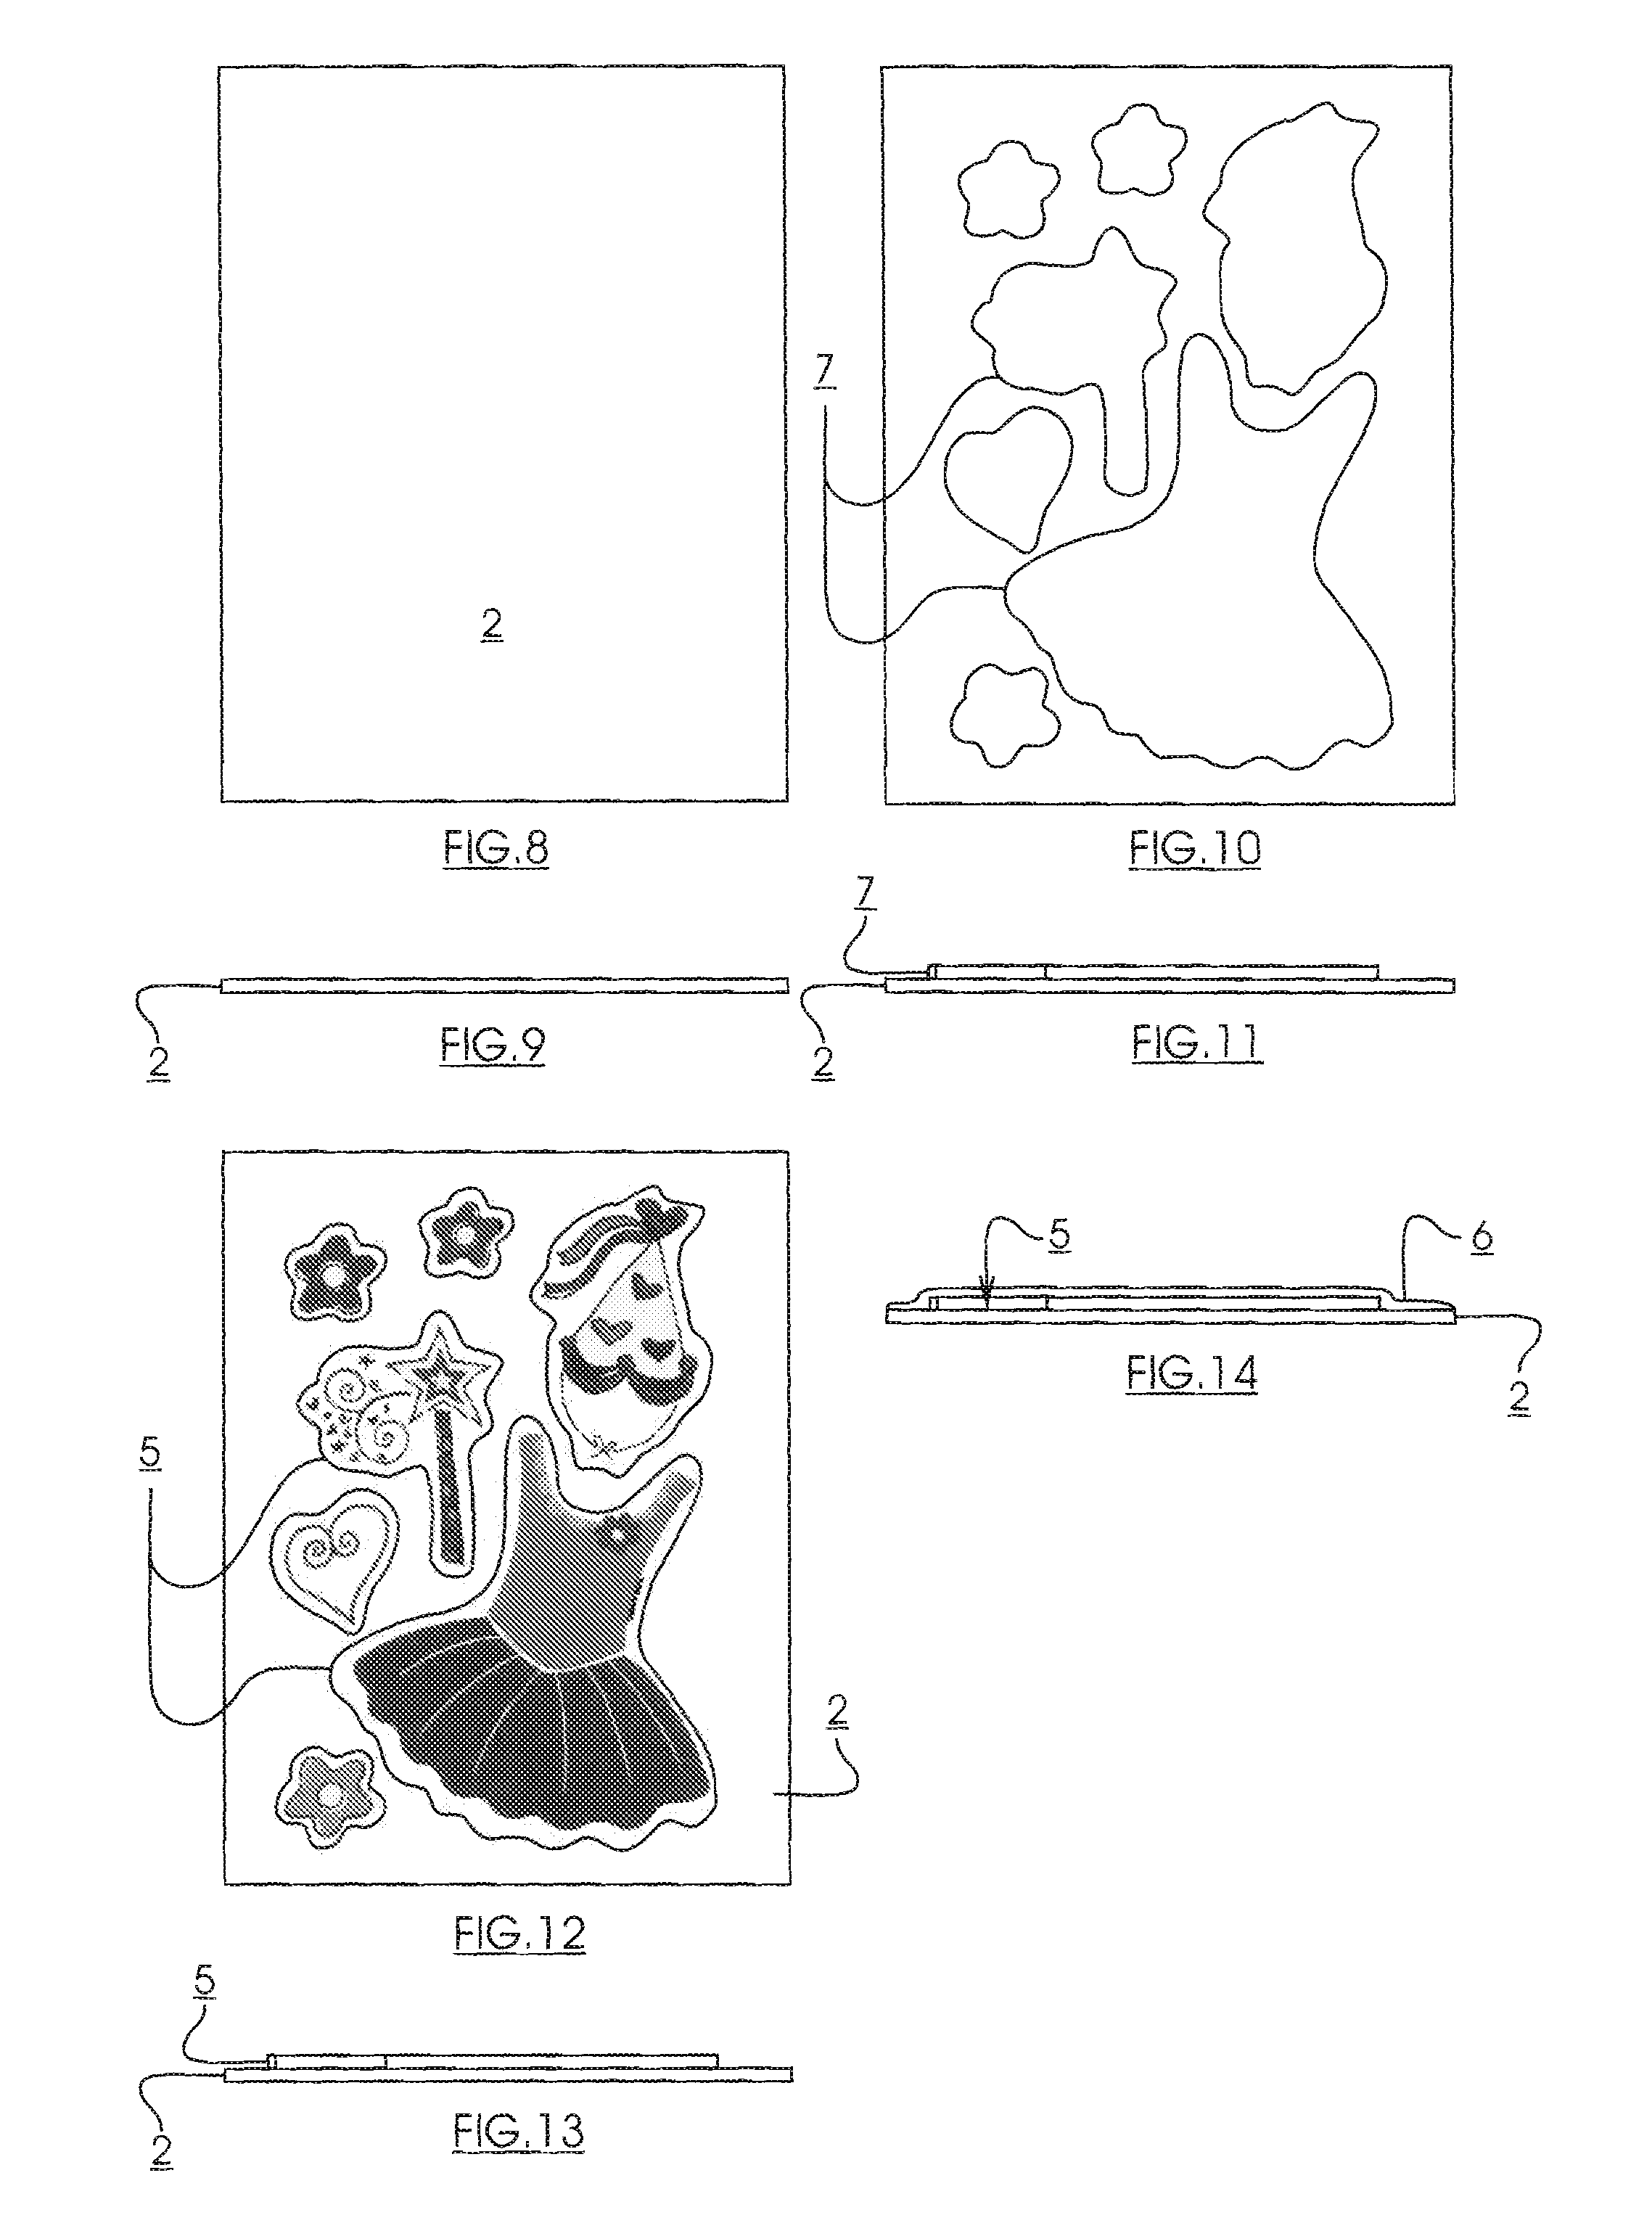 Coated edible substrate and related methods